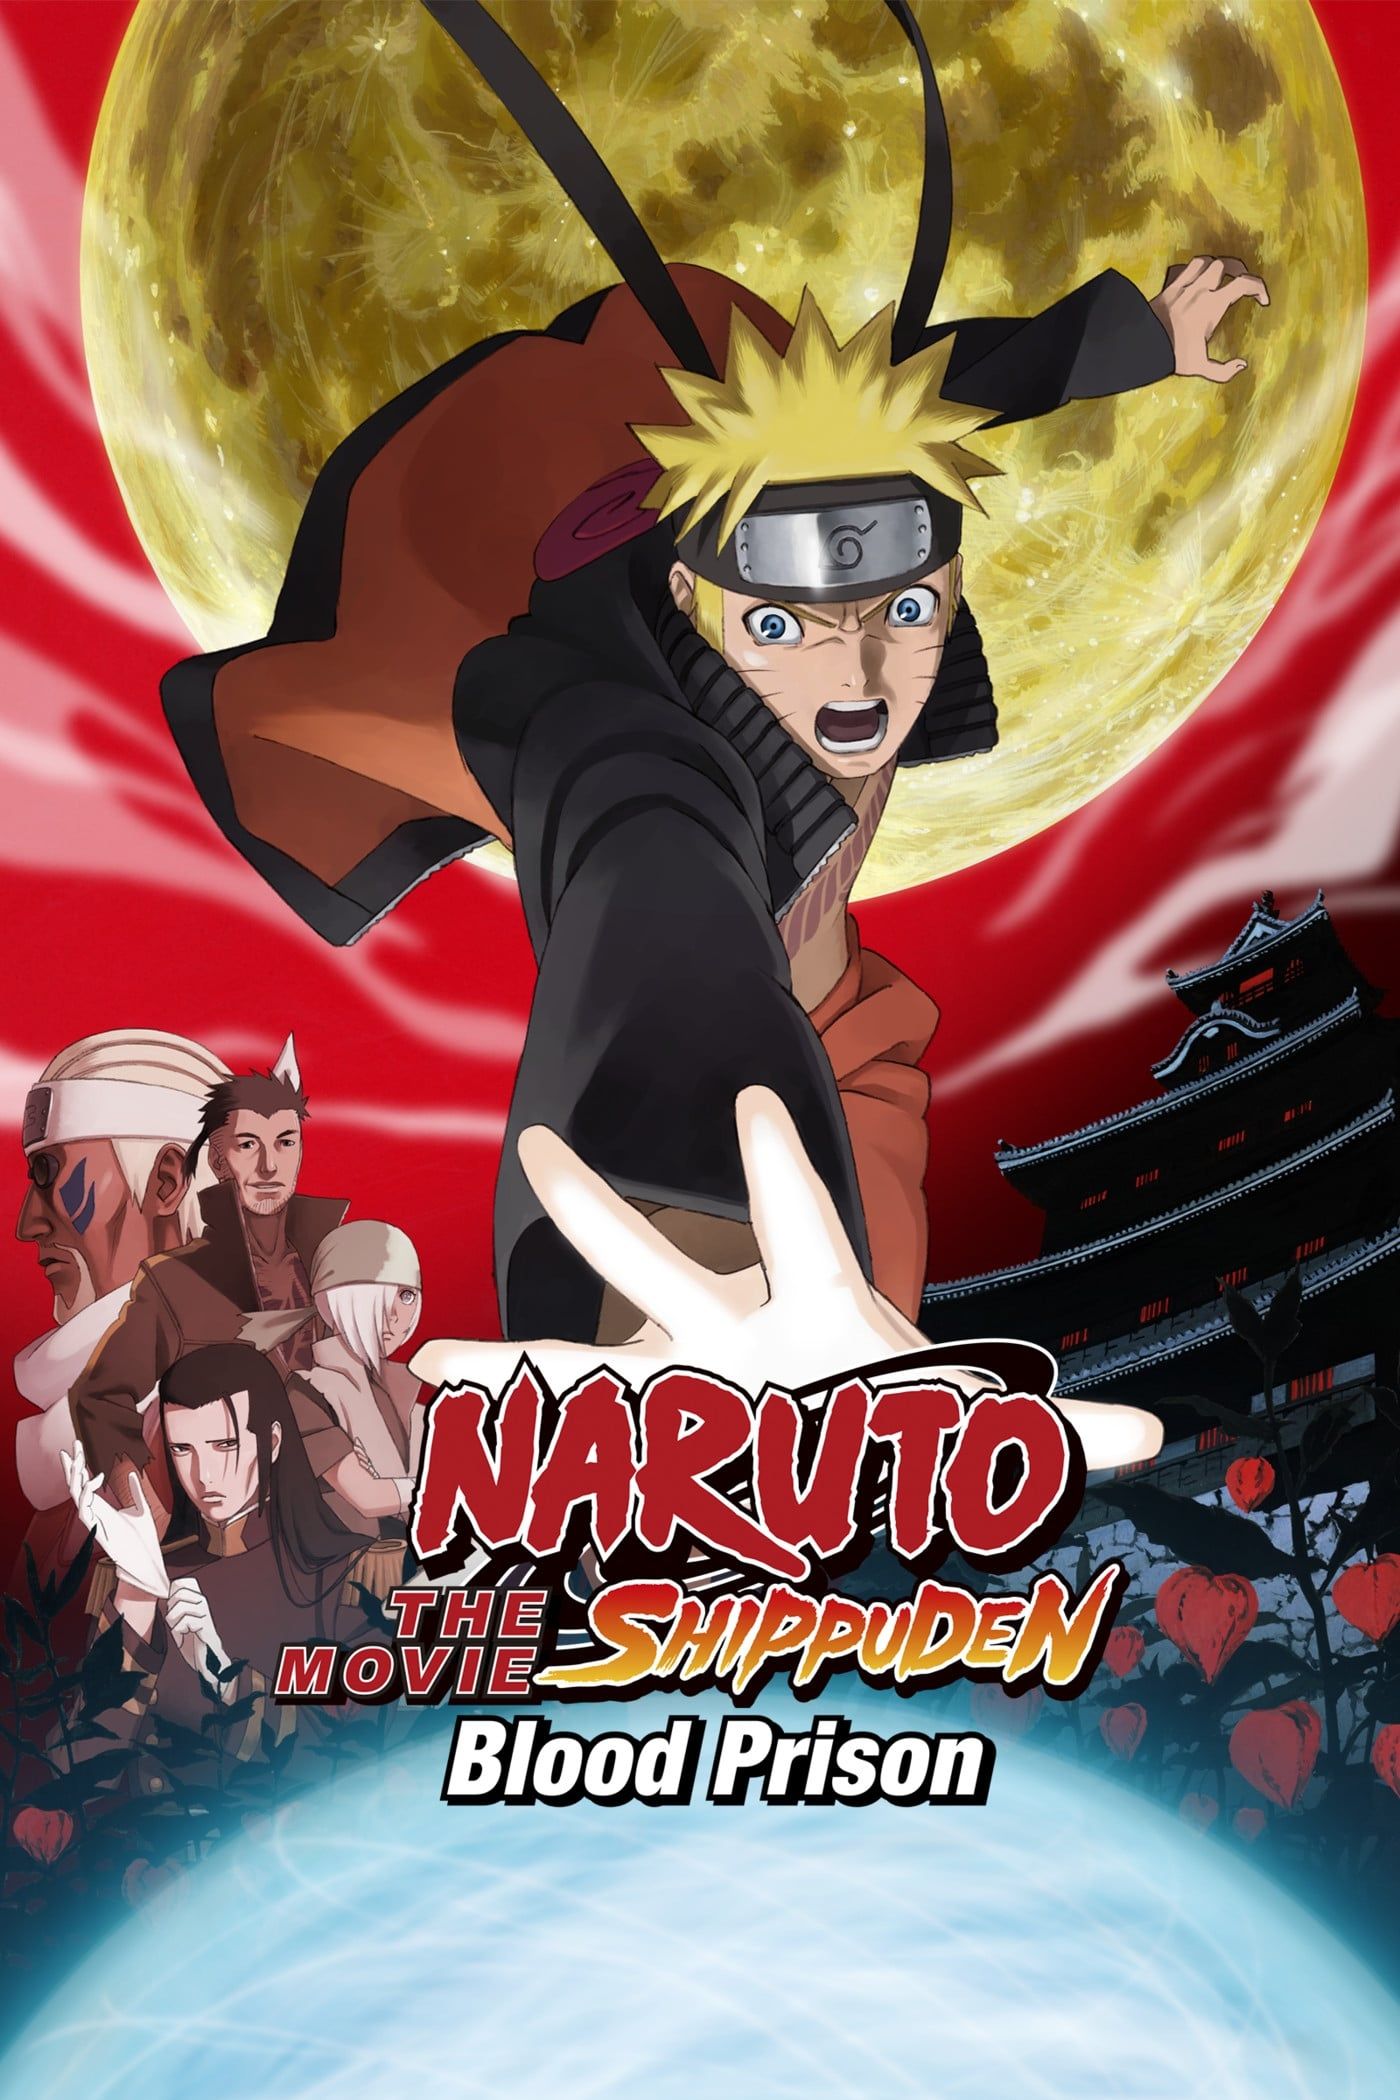 The Day Naruto Became Hokage (2016): Where to Watch and Stream Online